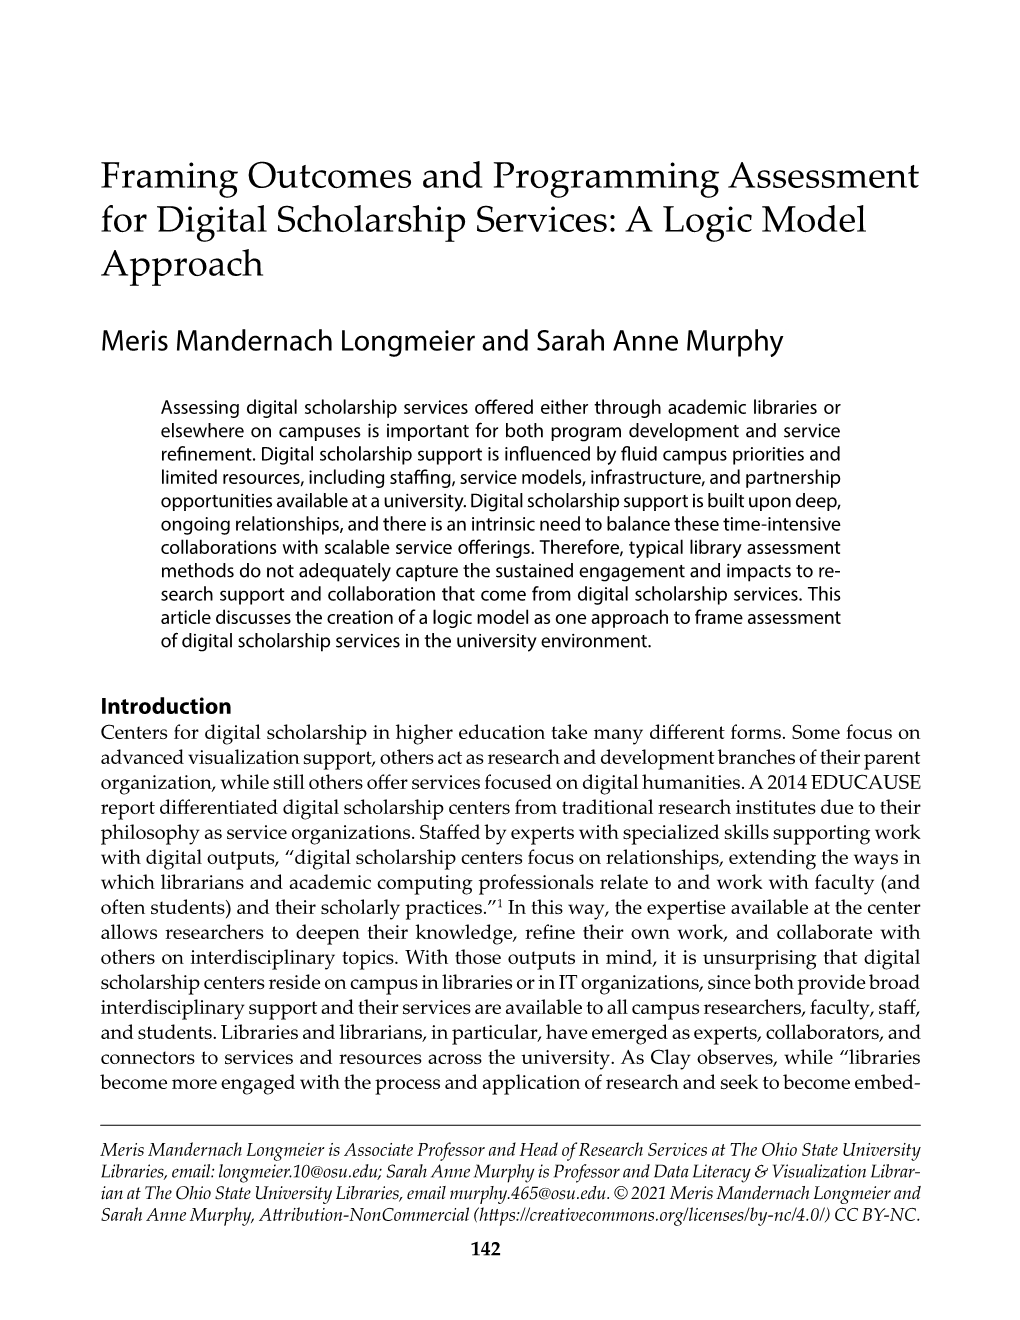 Framing Outcomes and Programming Assessment for Digital Scholarship Services: a Logic Model Approach